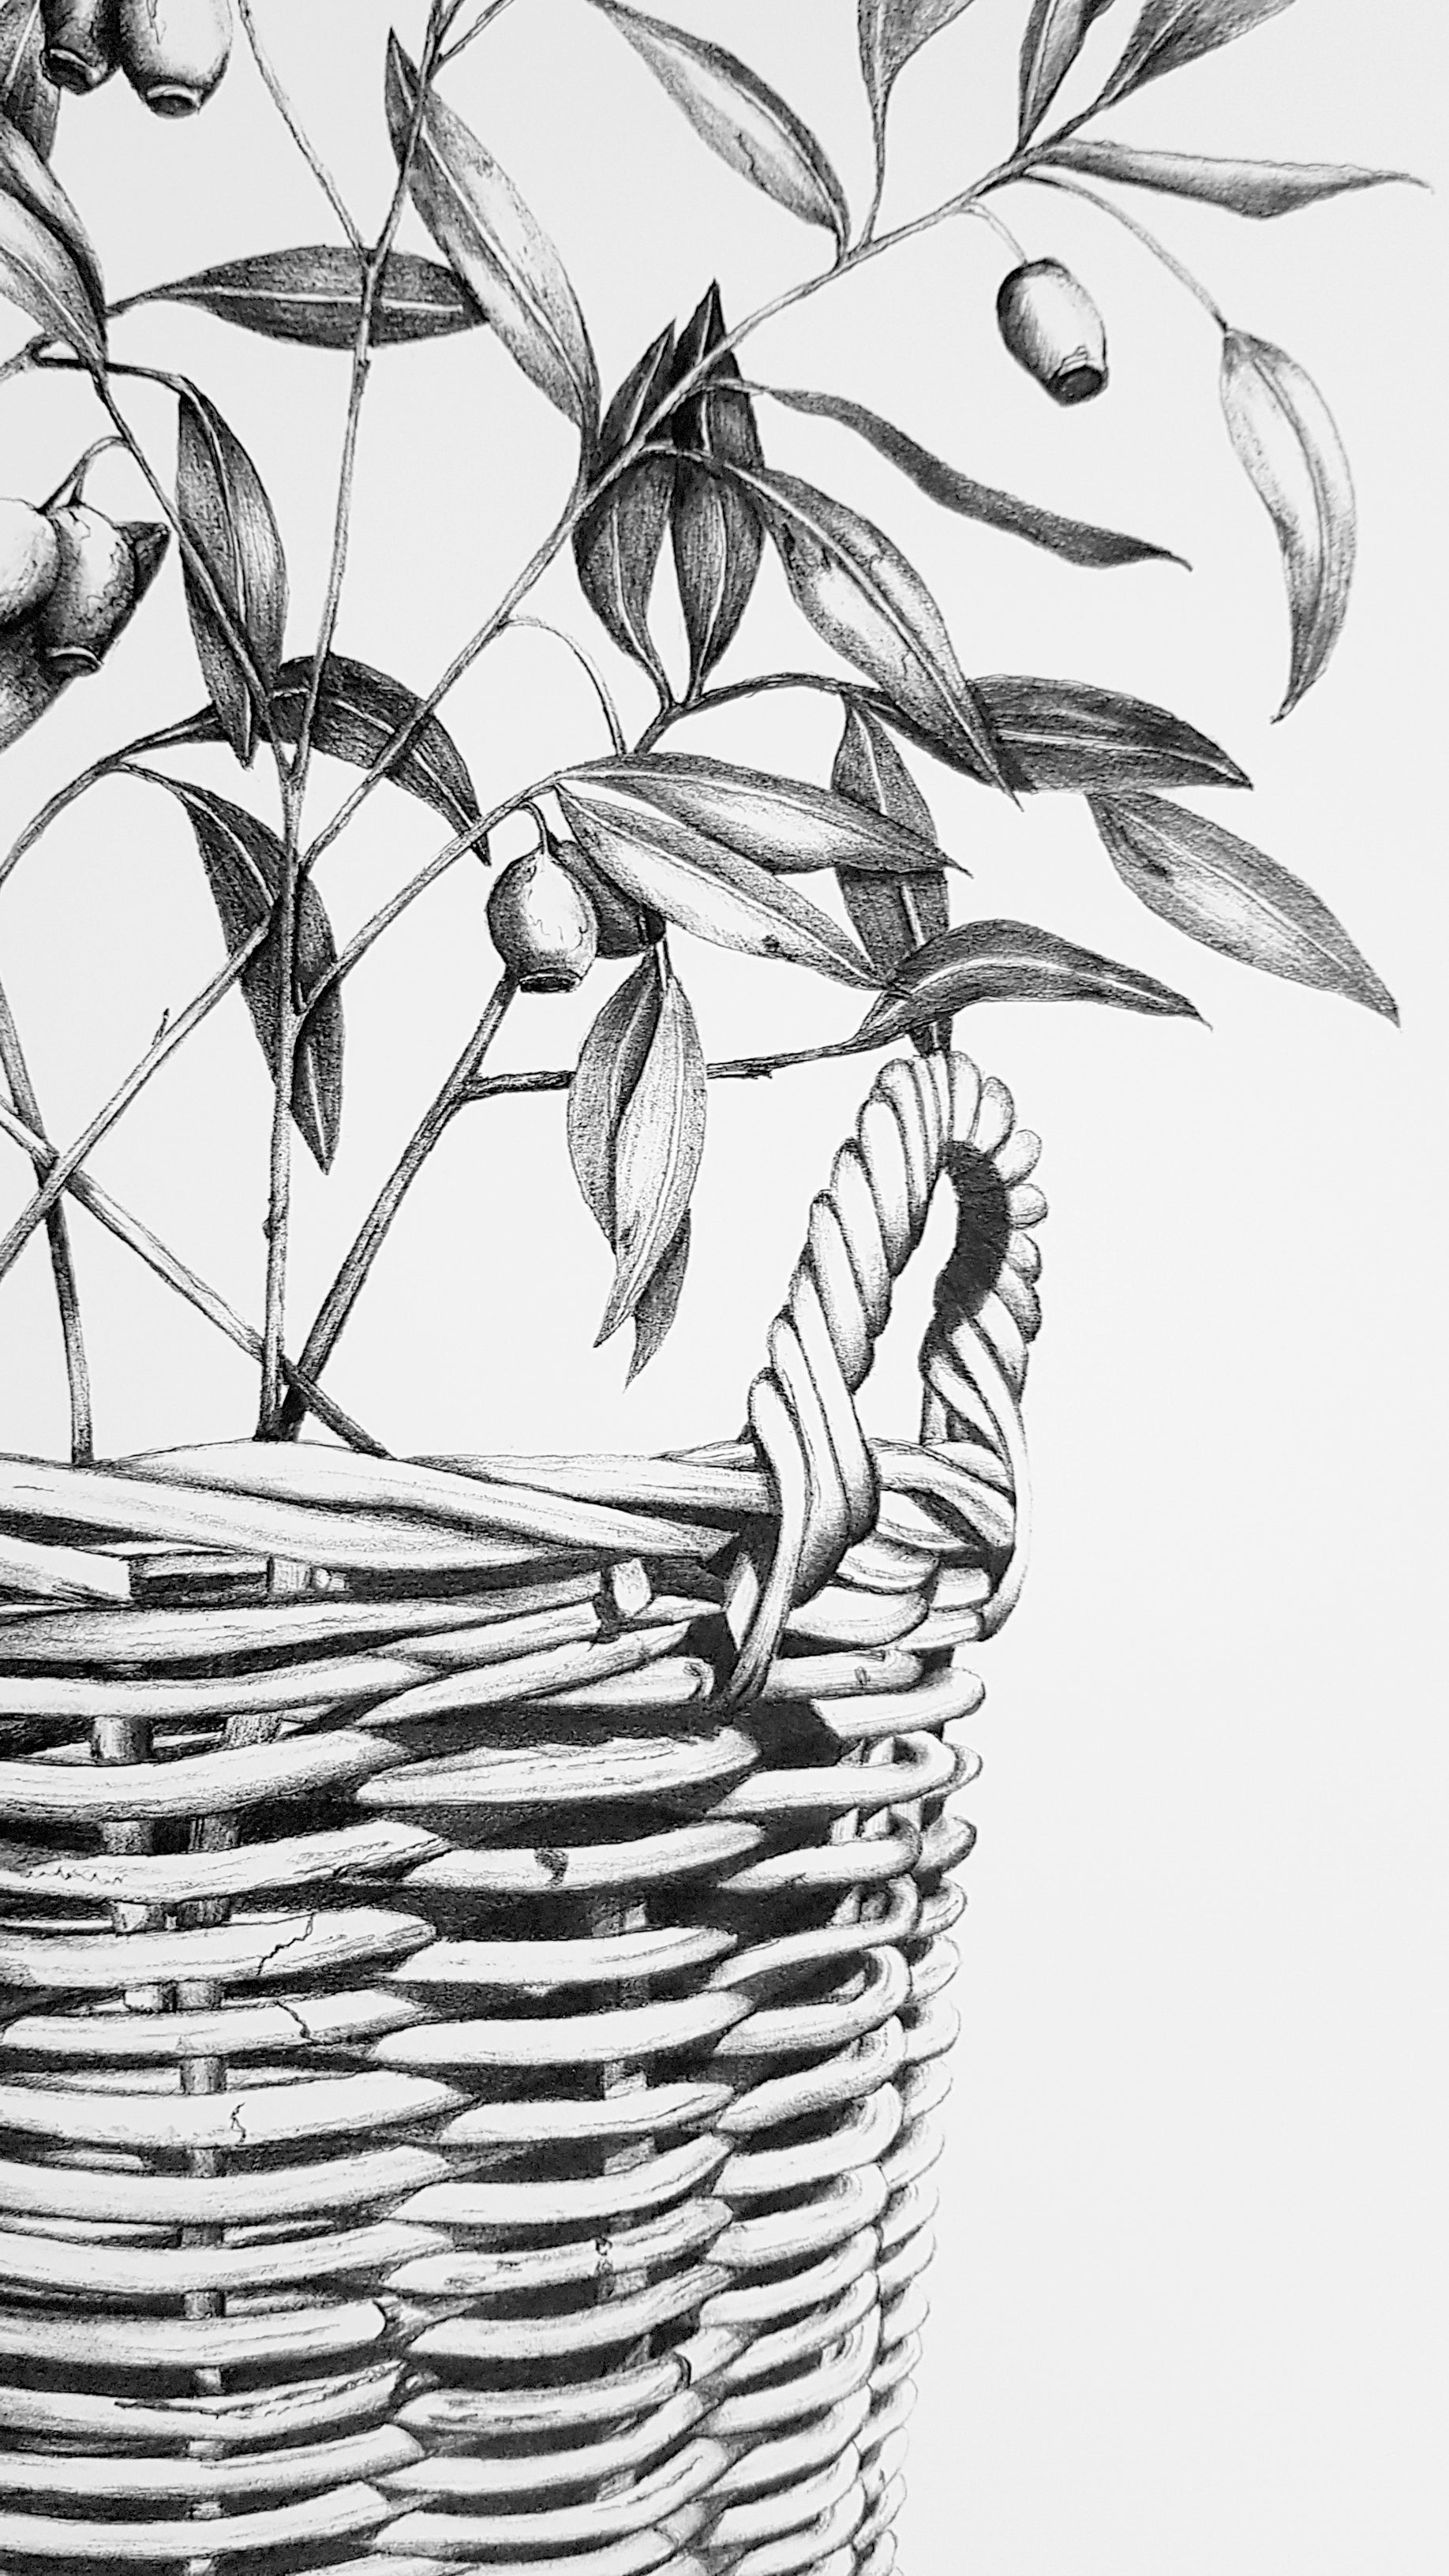 Detailed and close up shot of a hand drawn cane basket with gum leaves inside, drawn in graphite pencil